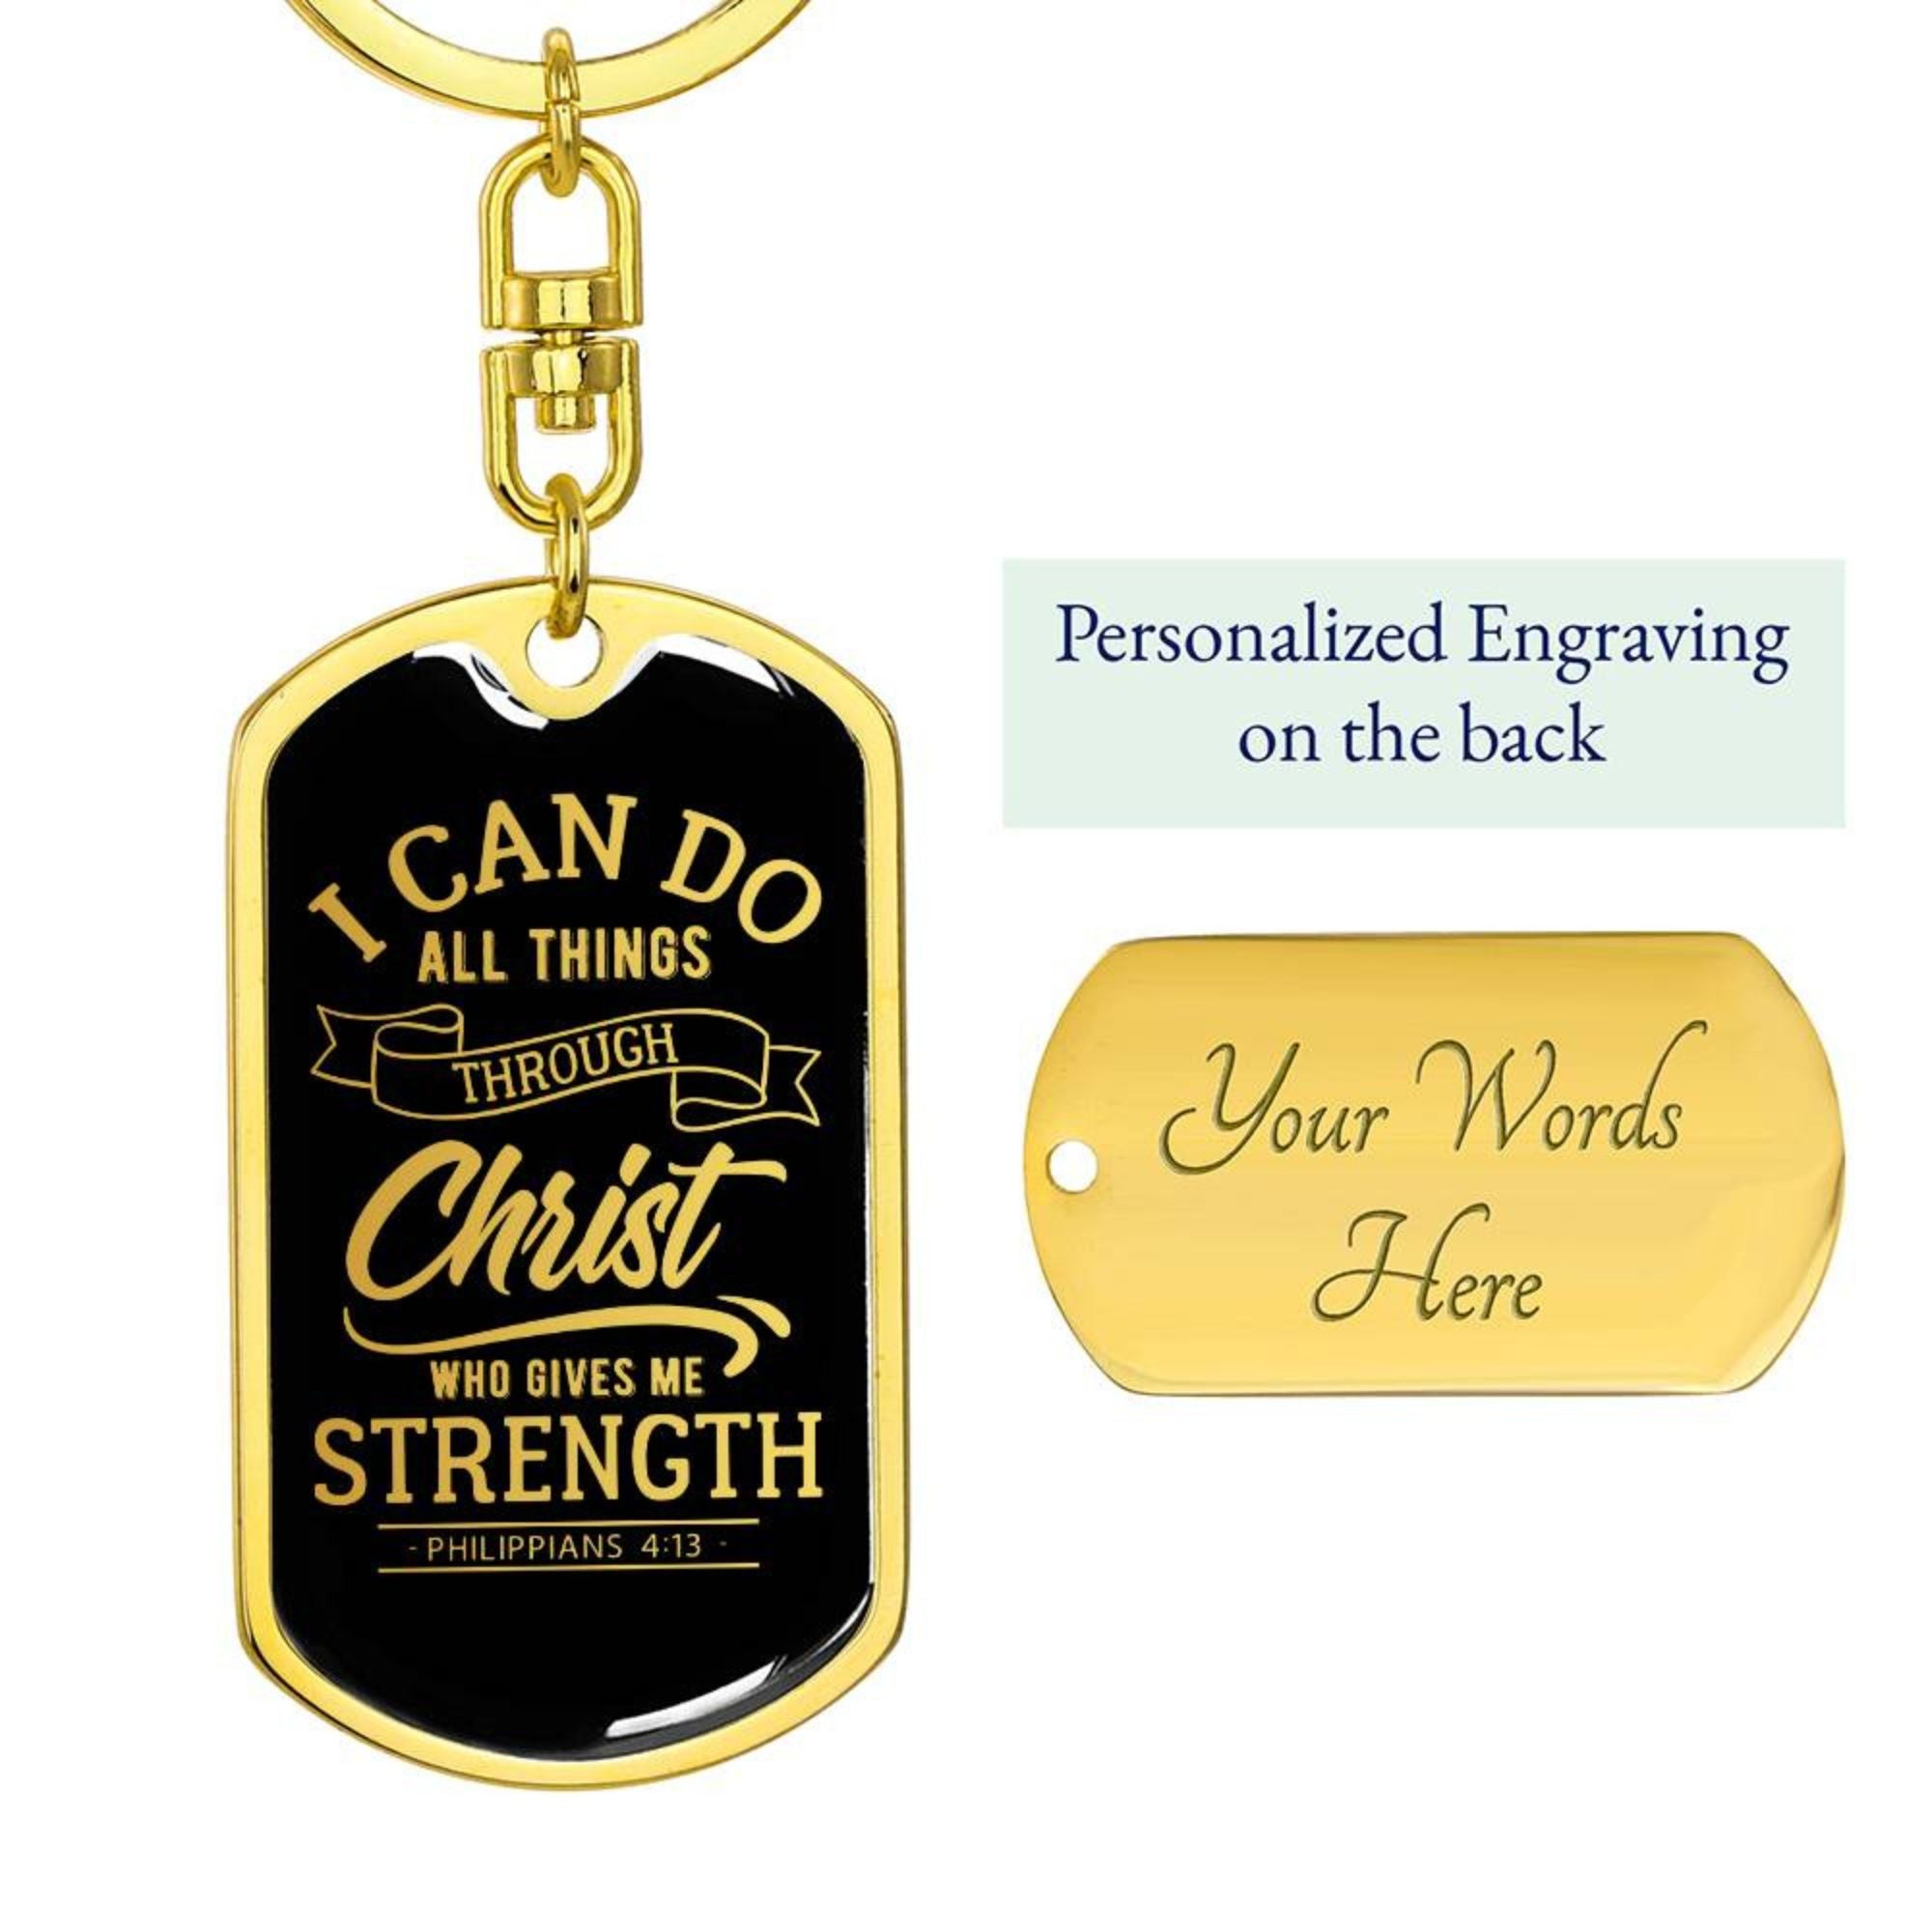 I Can Do All Things Through Christ - Gold Dog Tag with Swivel Keychain Engraving: No Jesus Passion Apparel